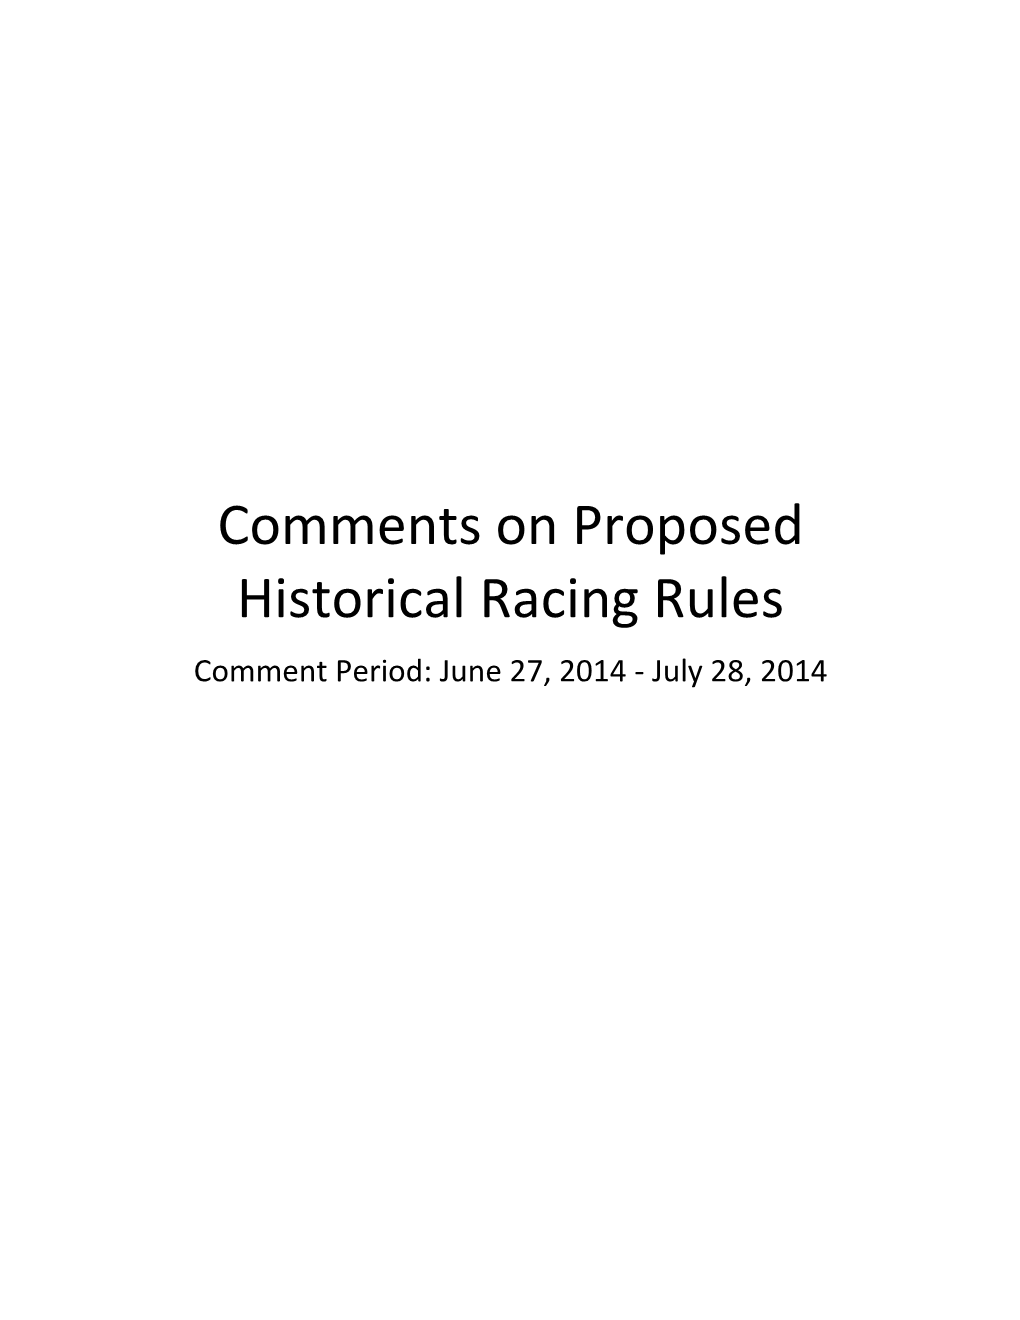 Comments on Proposed Historical Racing Rules